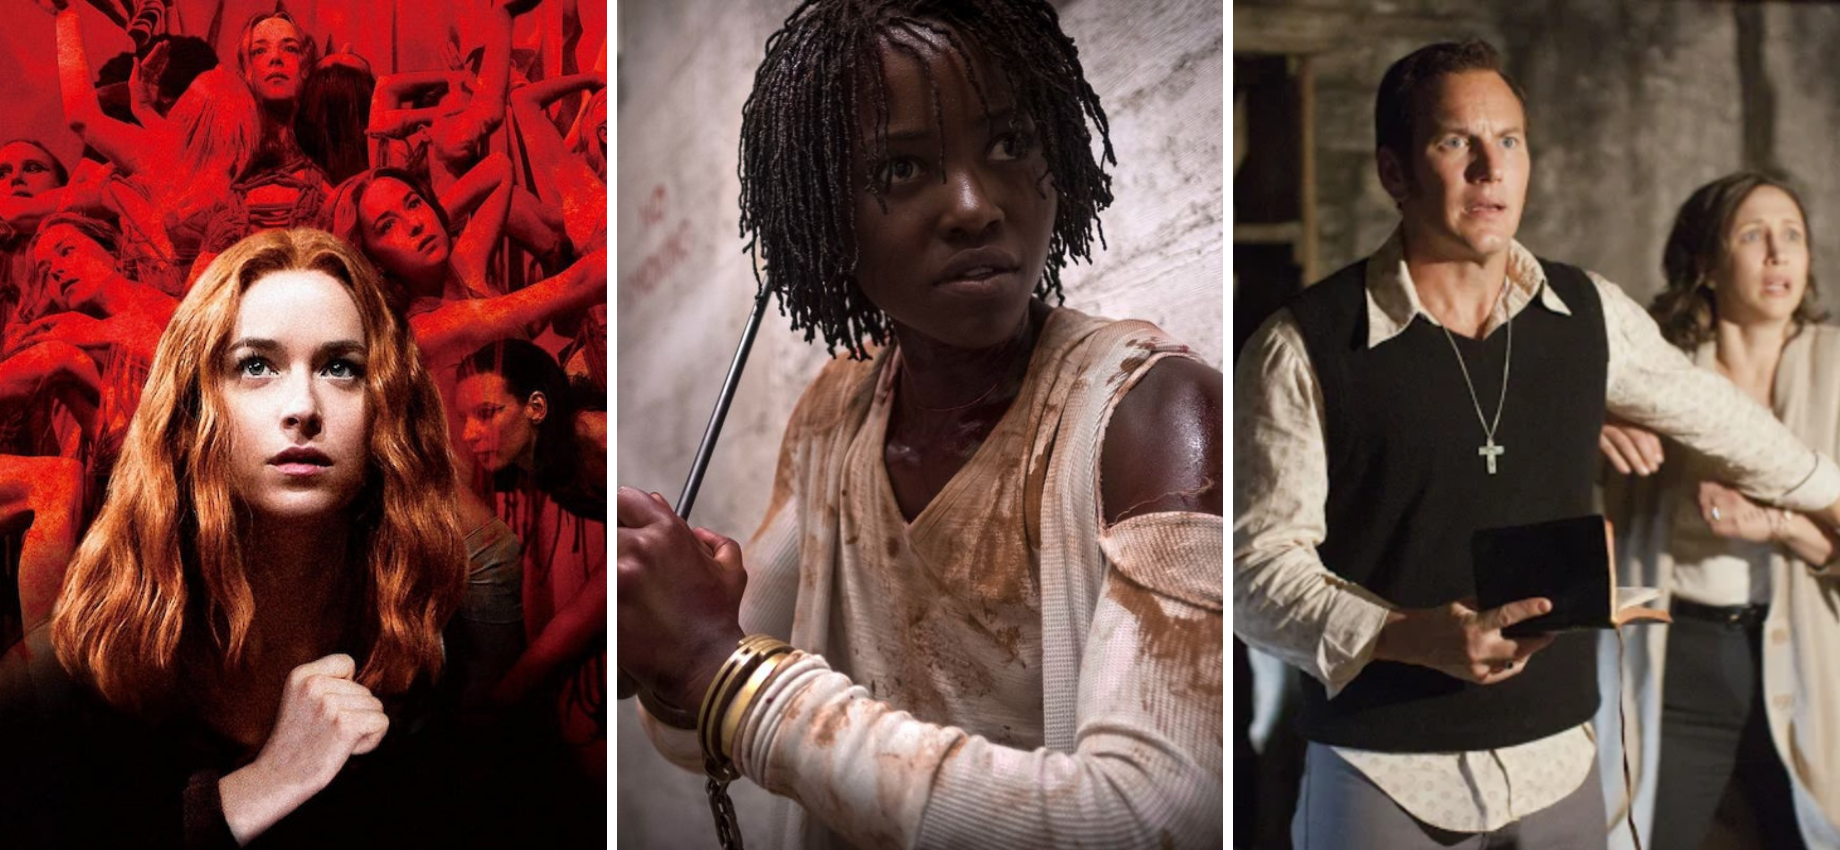 6 Of The Scariest Movies To Watch This Month